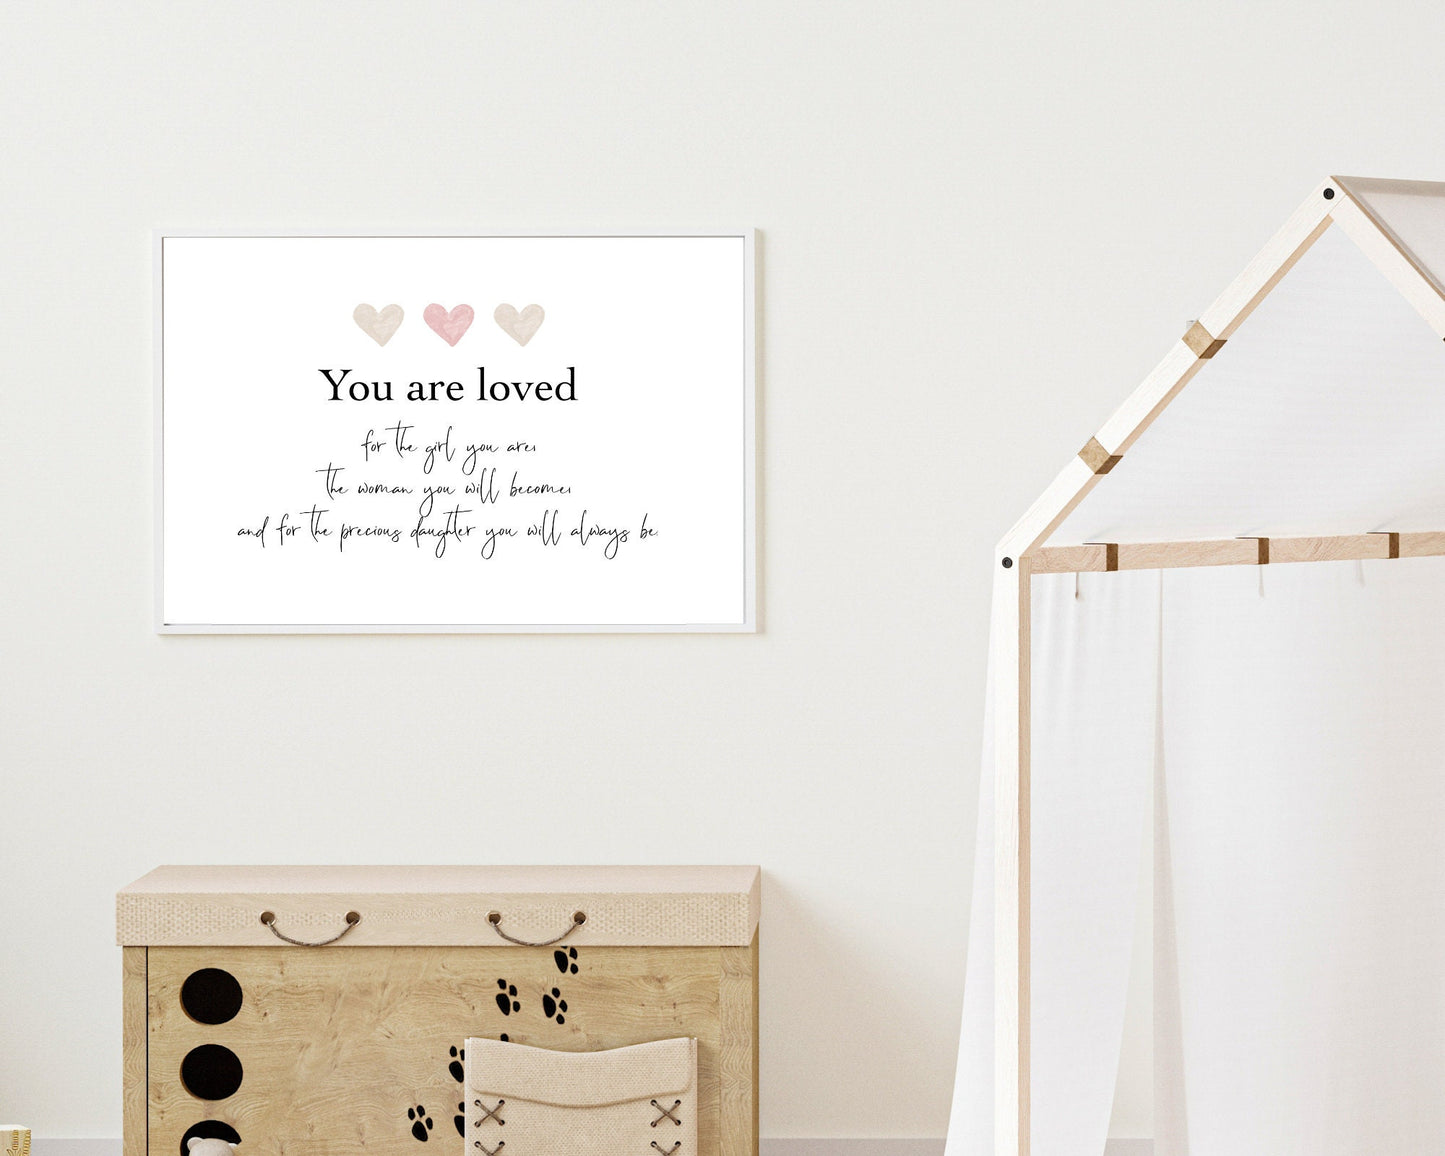 A little girl’s room digital poster that is hung on a wall and has three hearts at the top with a piece of writing that says: “You are loved for the girl you are, the woman you will become, and for the precious daughter you will always be.”